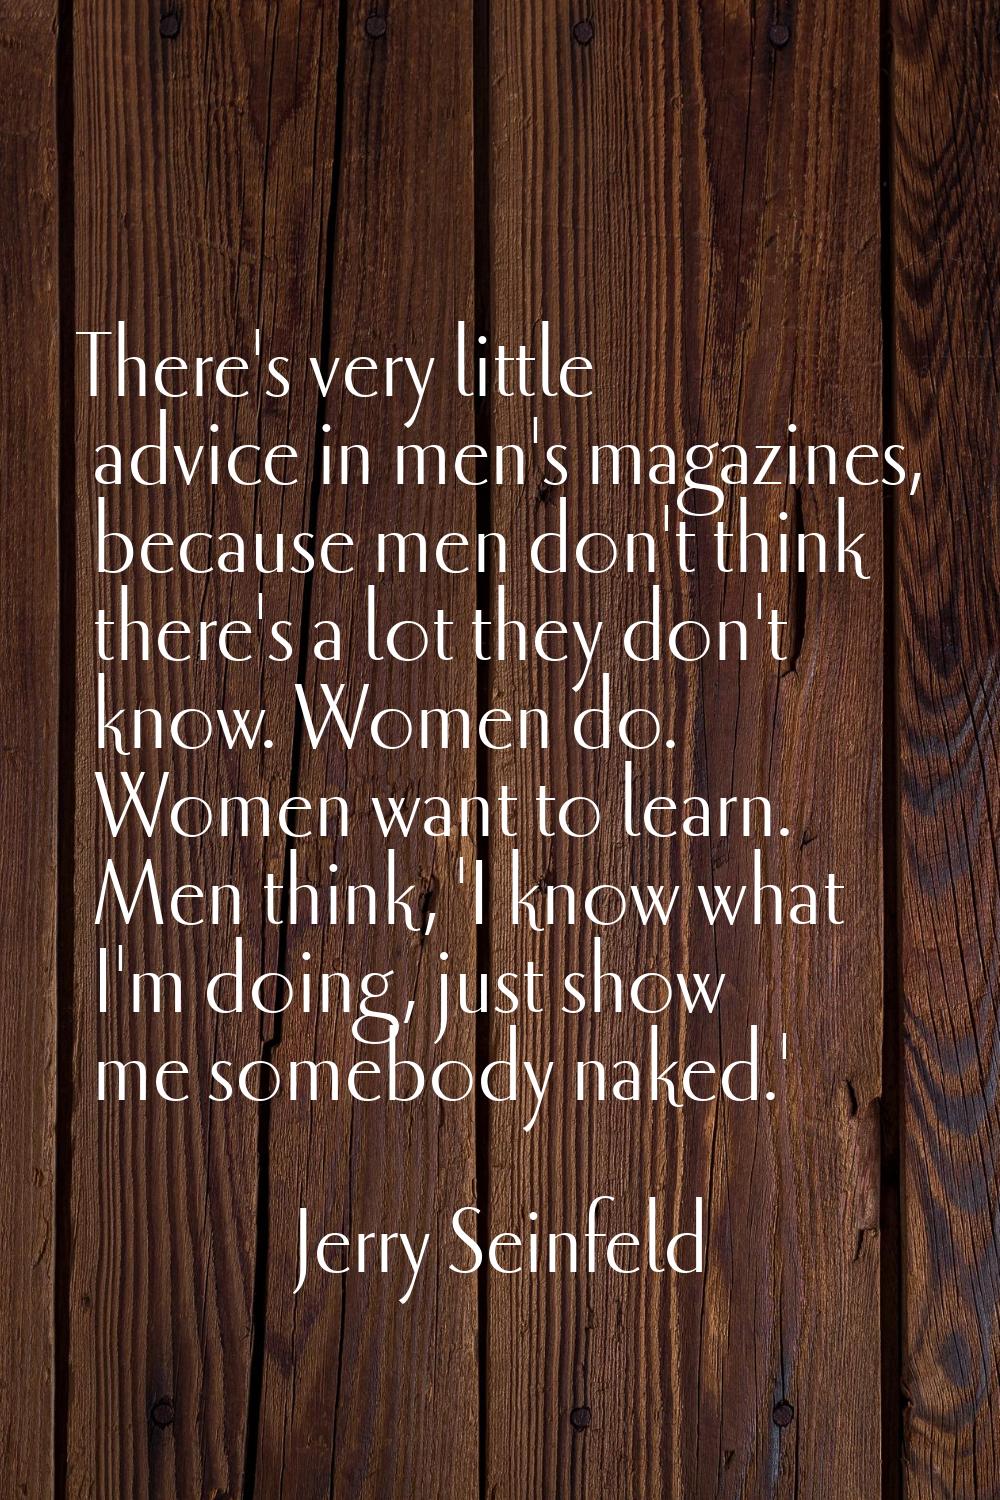 There's very little advice in men's magazines, because men don't think there's a lot they don't kno